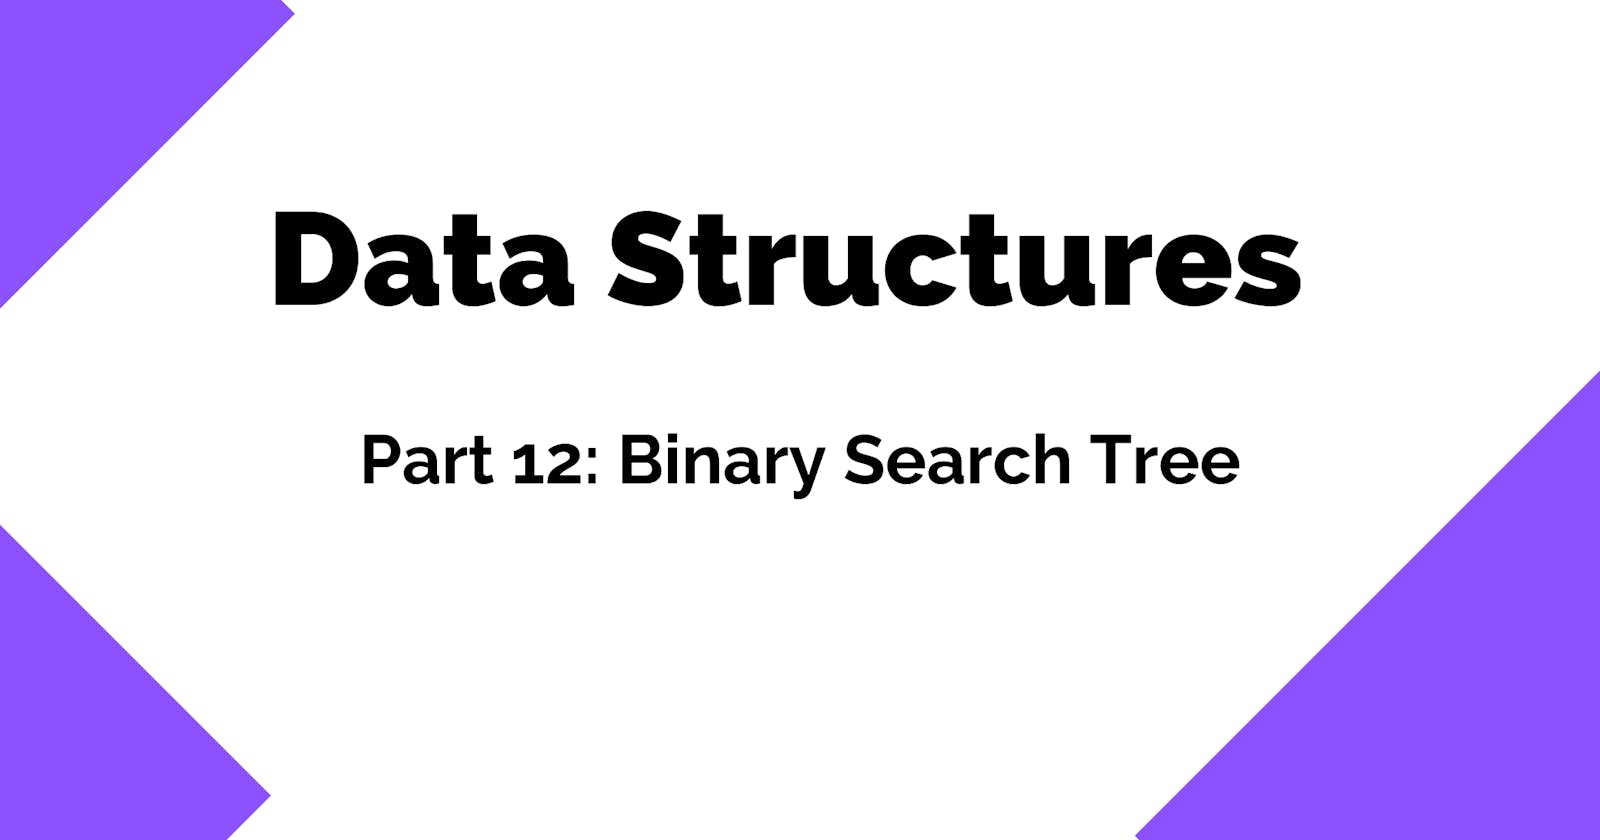 Data Structures 101: Binary Search Trees